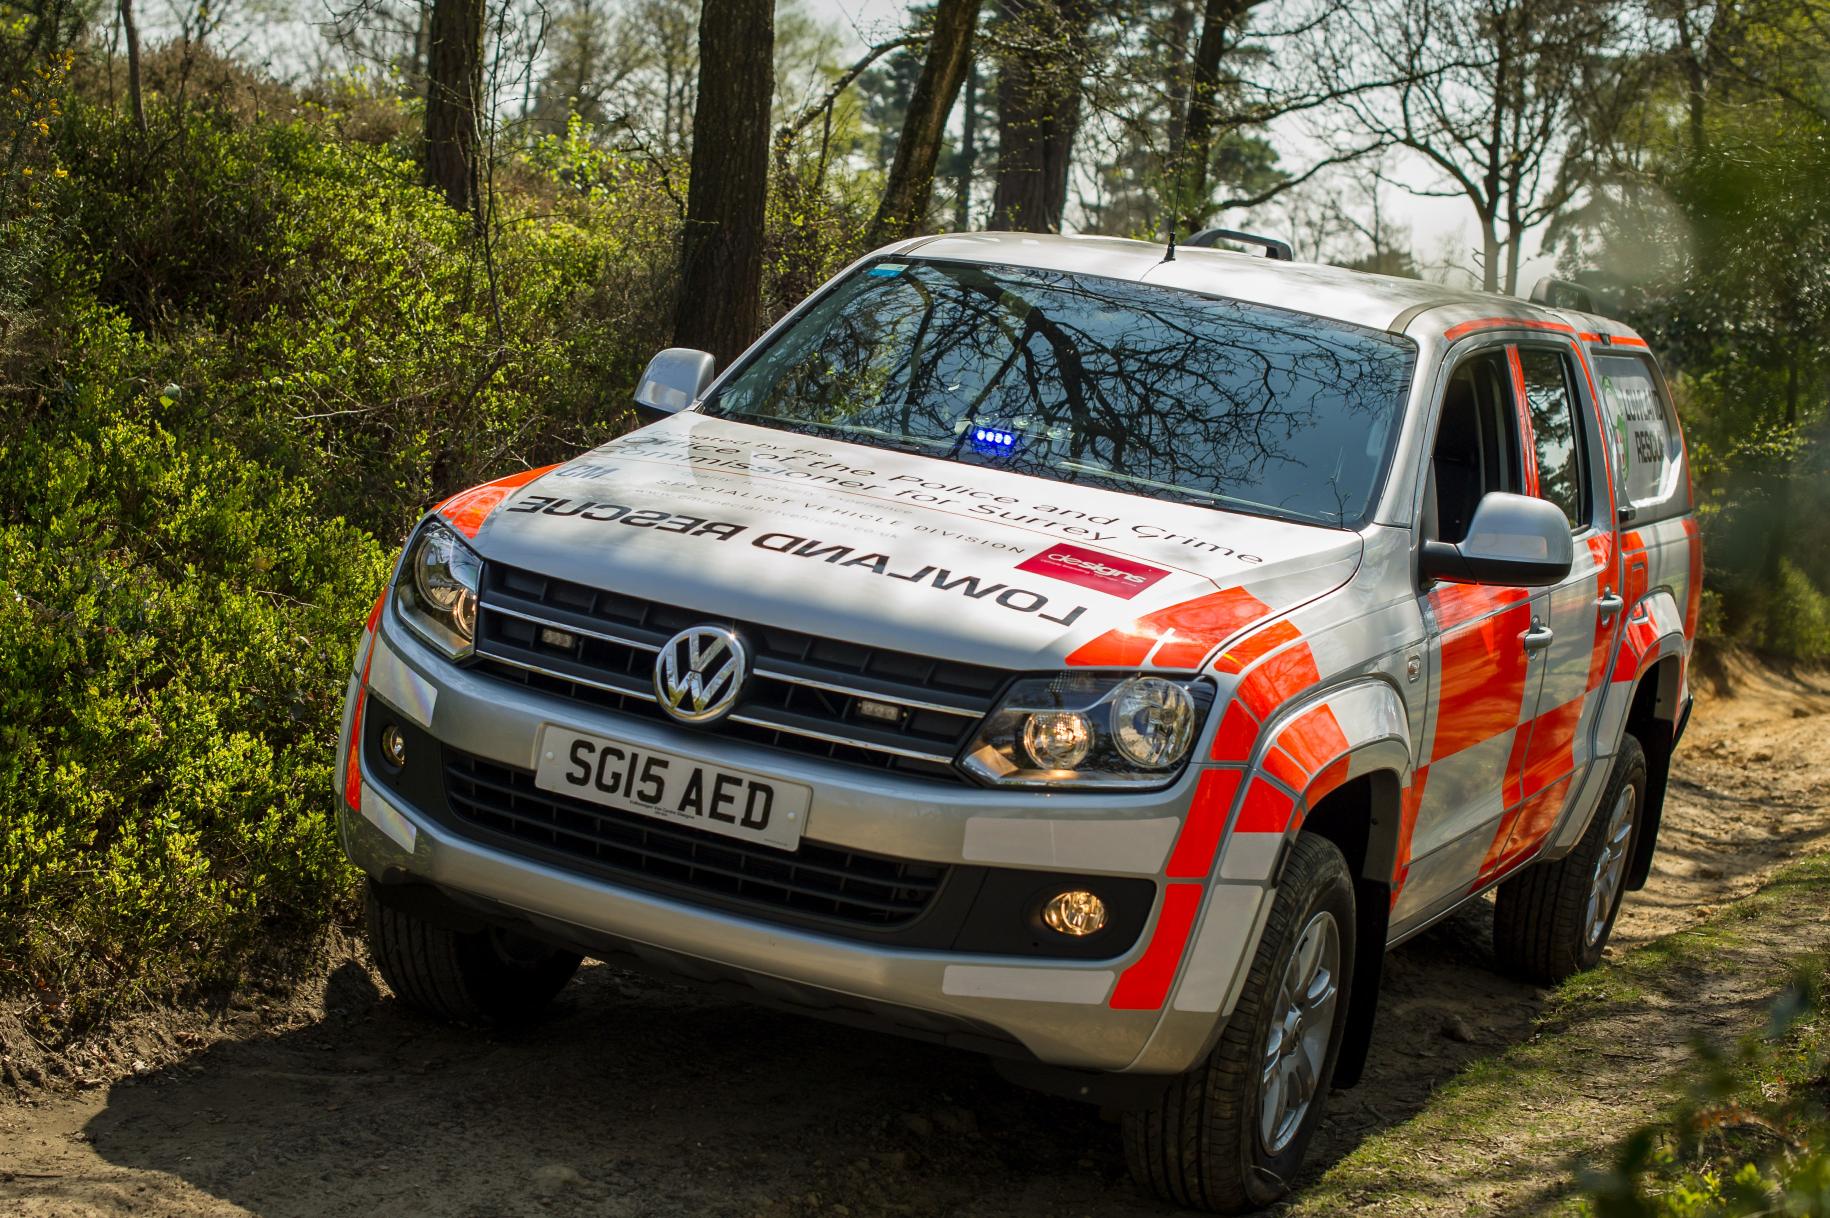 The VW Amarok search and rescue vehicle - CommercialVehicle.com